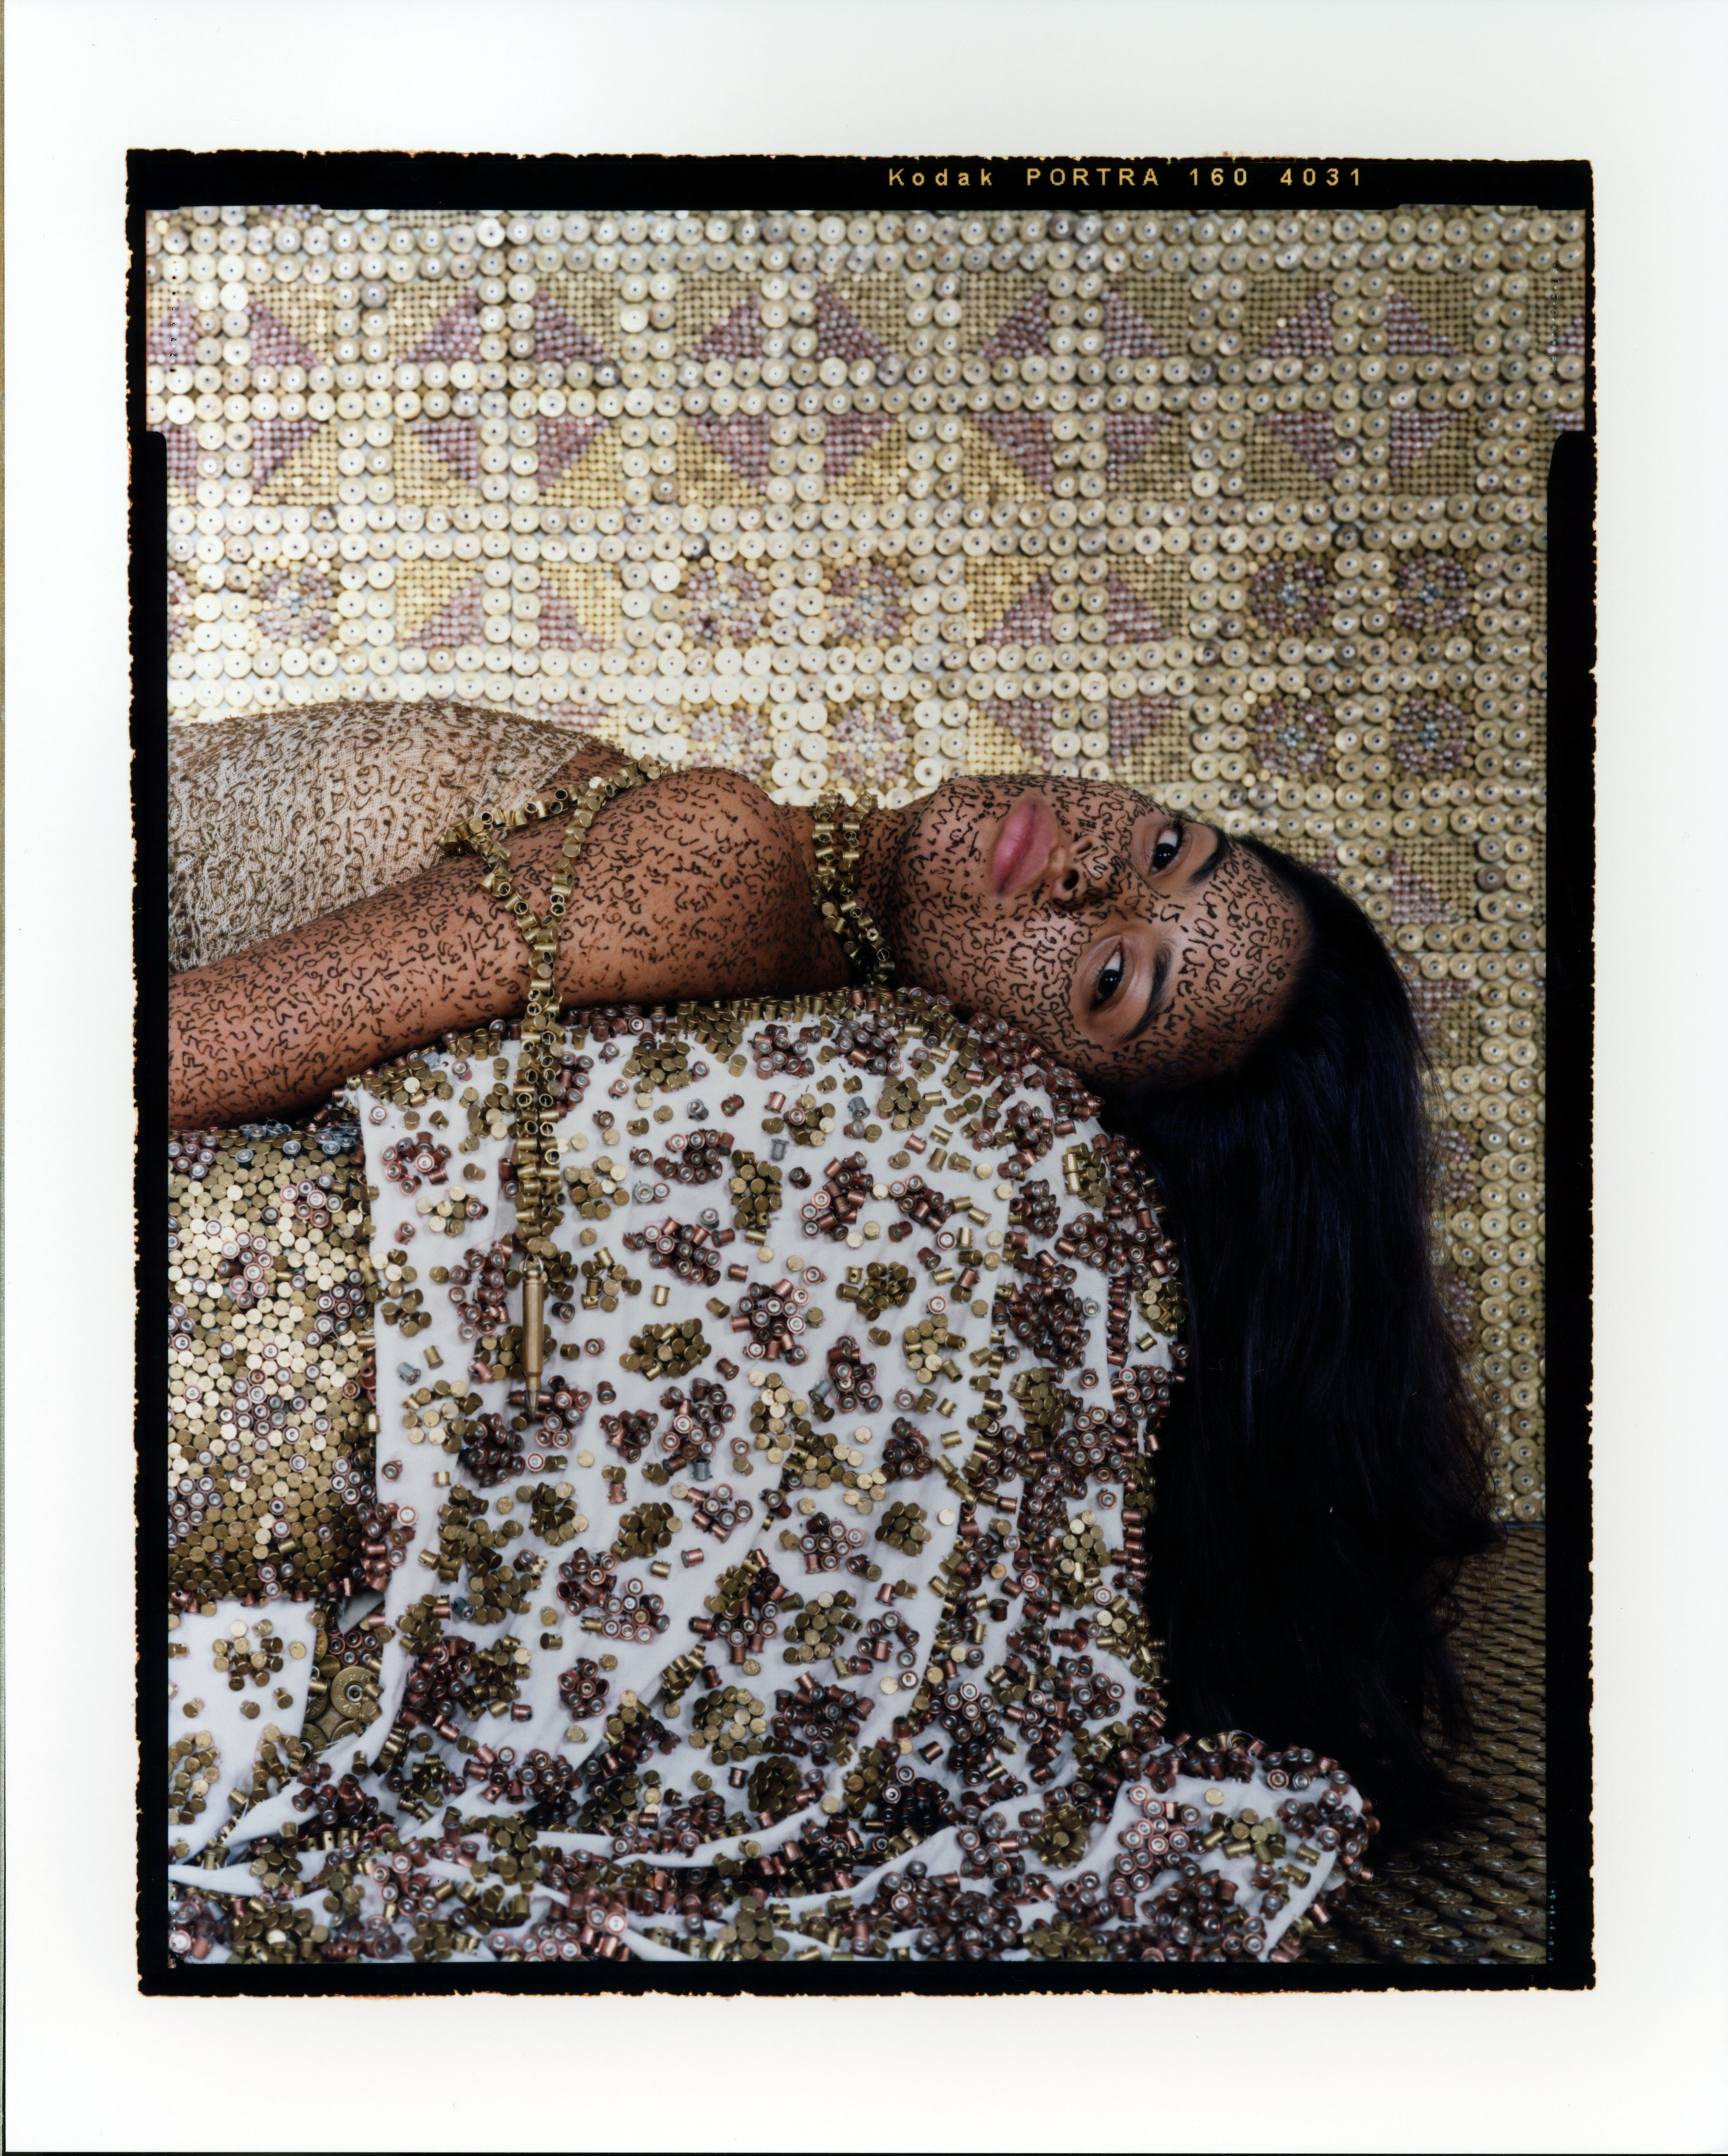 A woman lying on her back on a bed, seen from the chest up. Her head turns left to look at the viewer. She wears a light, sleeveless top with long necklaces and her long, dark hair falls to the floor. A metallic surface covers everything—the walls, furniture, and the woman.